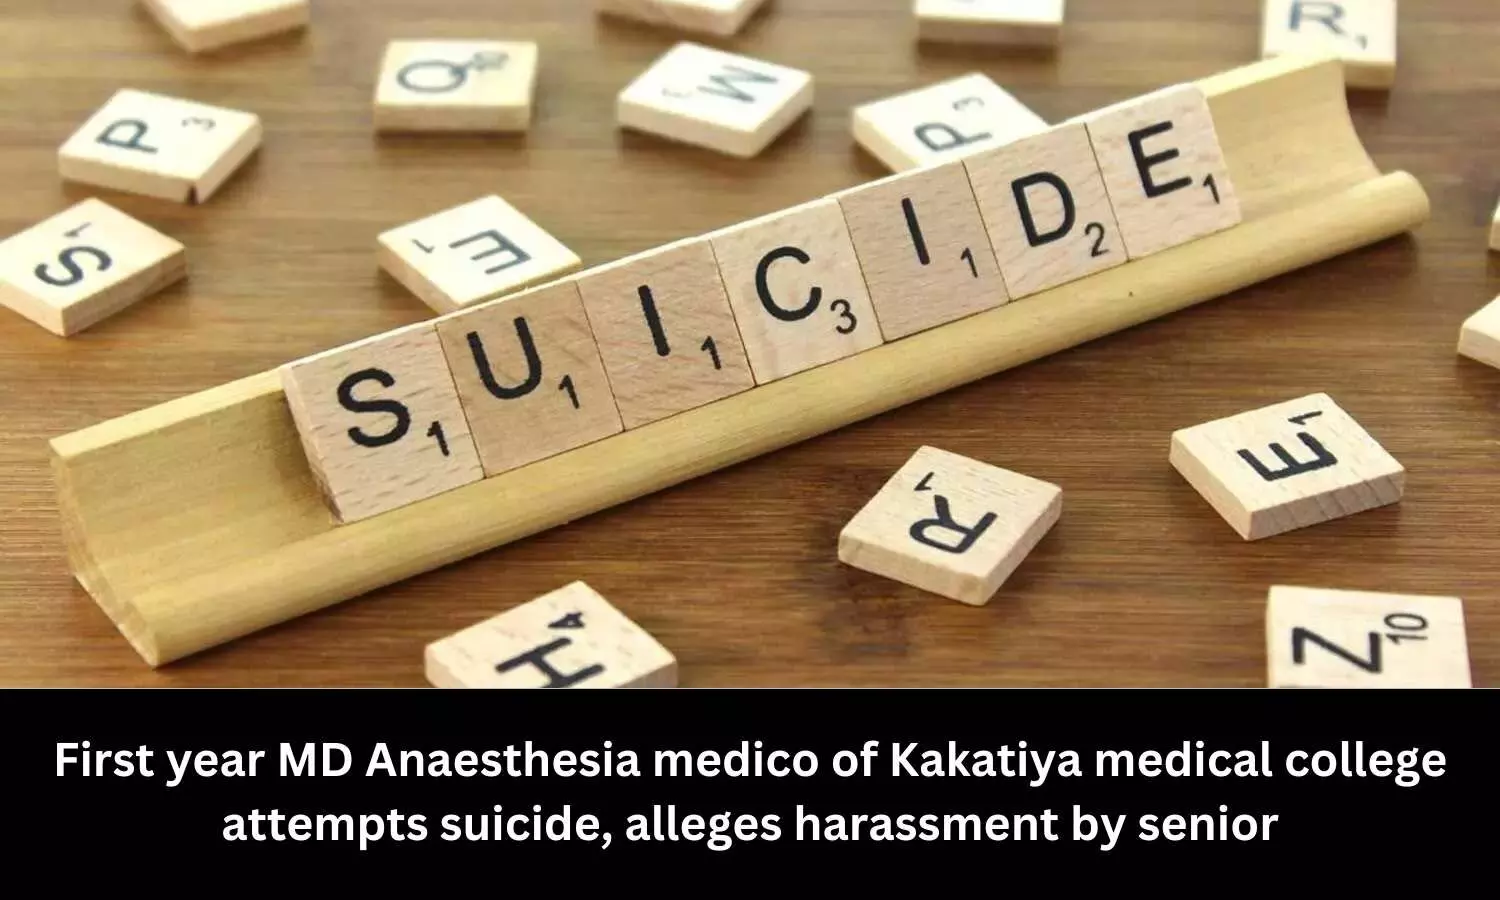 MD Anaesthesia medico of Kakatiya Medical College attempts suicide